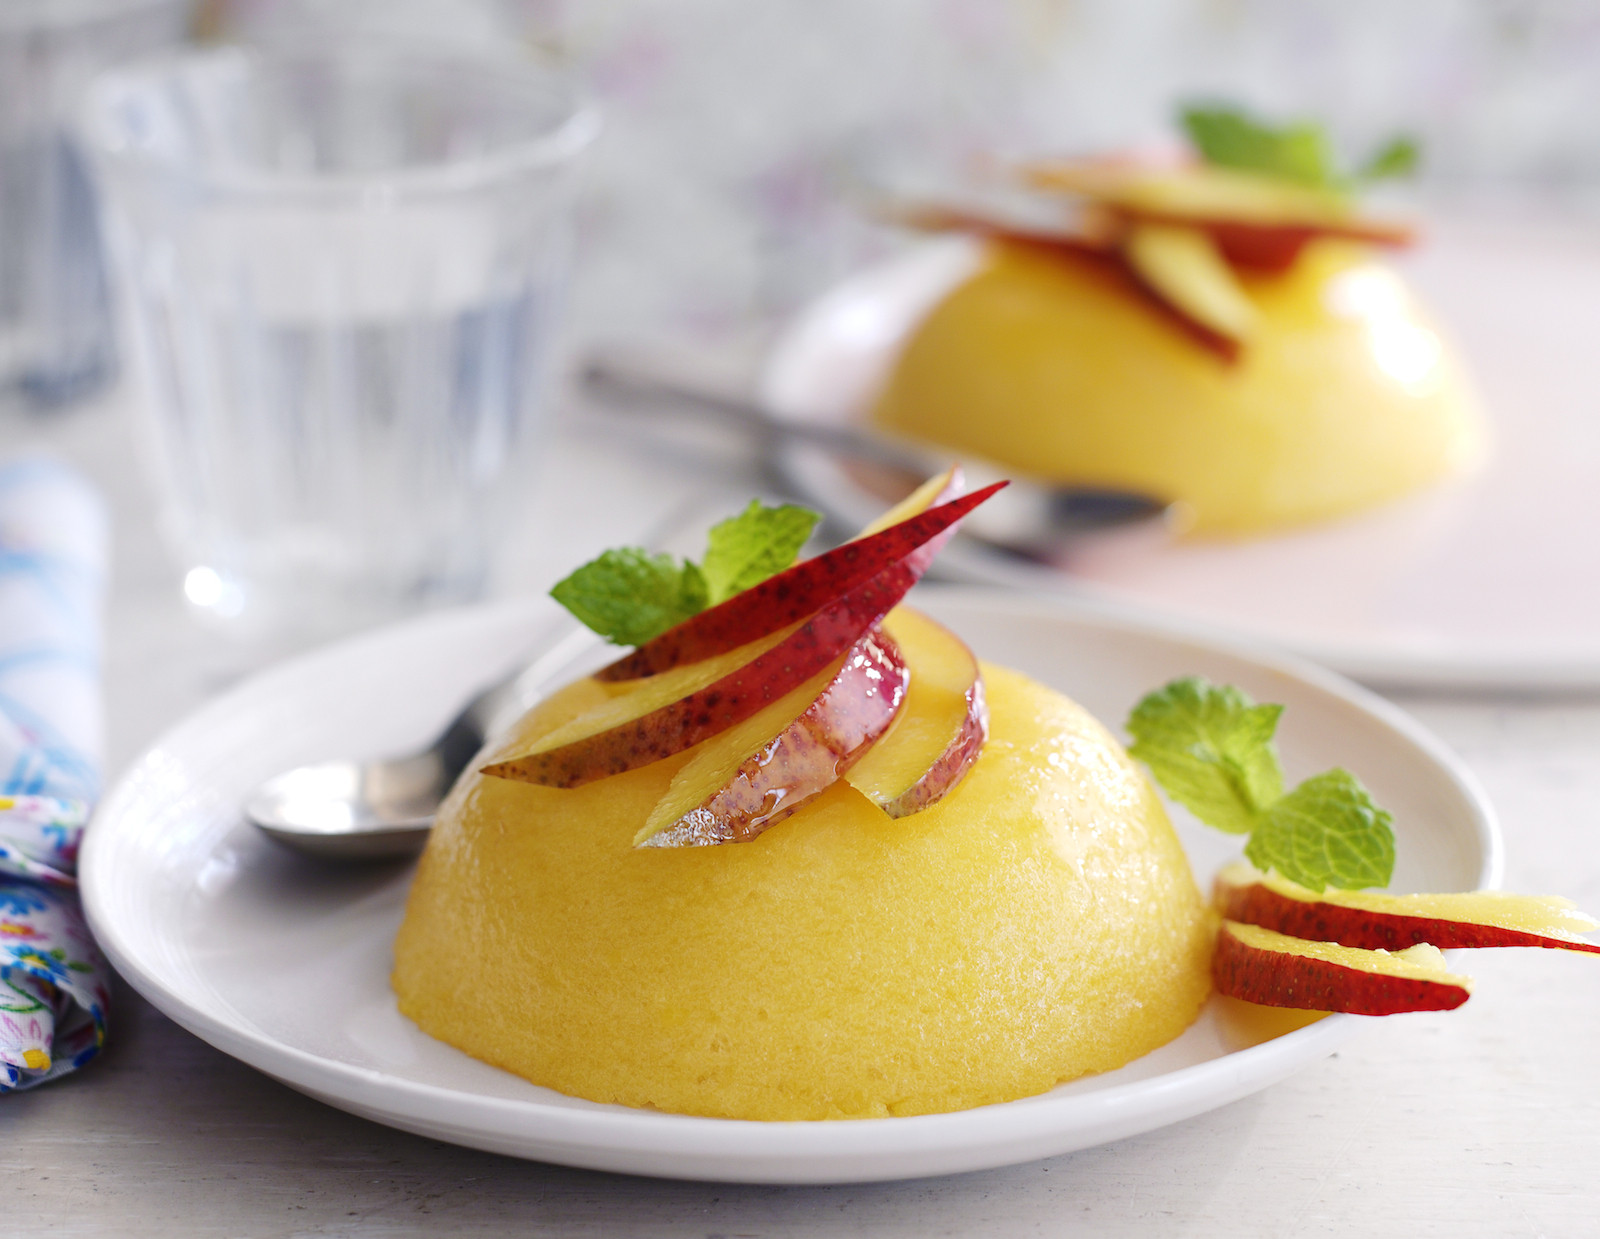 Asian Dessert Recipes
 Summer Sweets Make This Chinese Mango Pudding Recipe